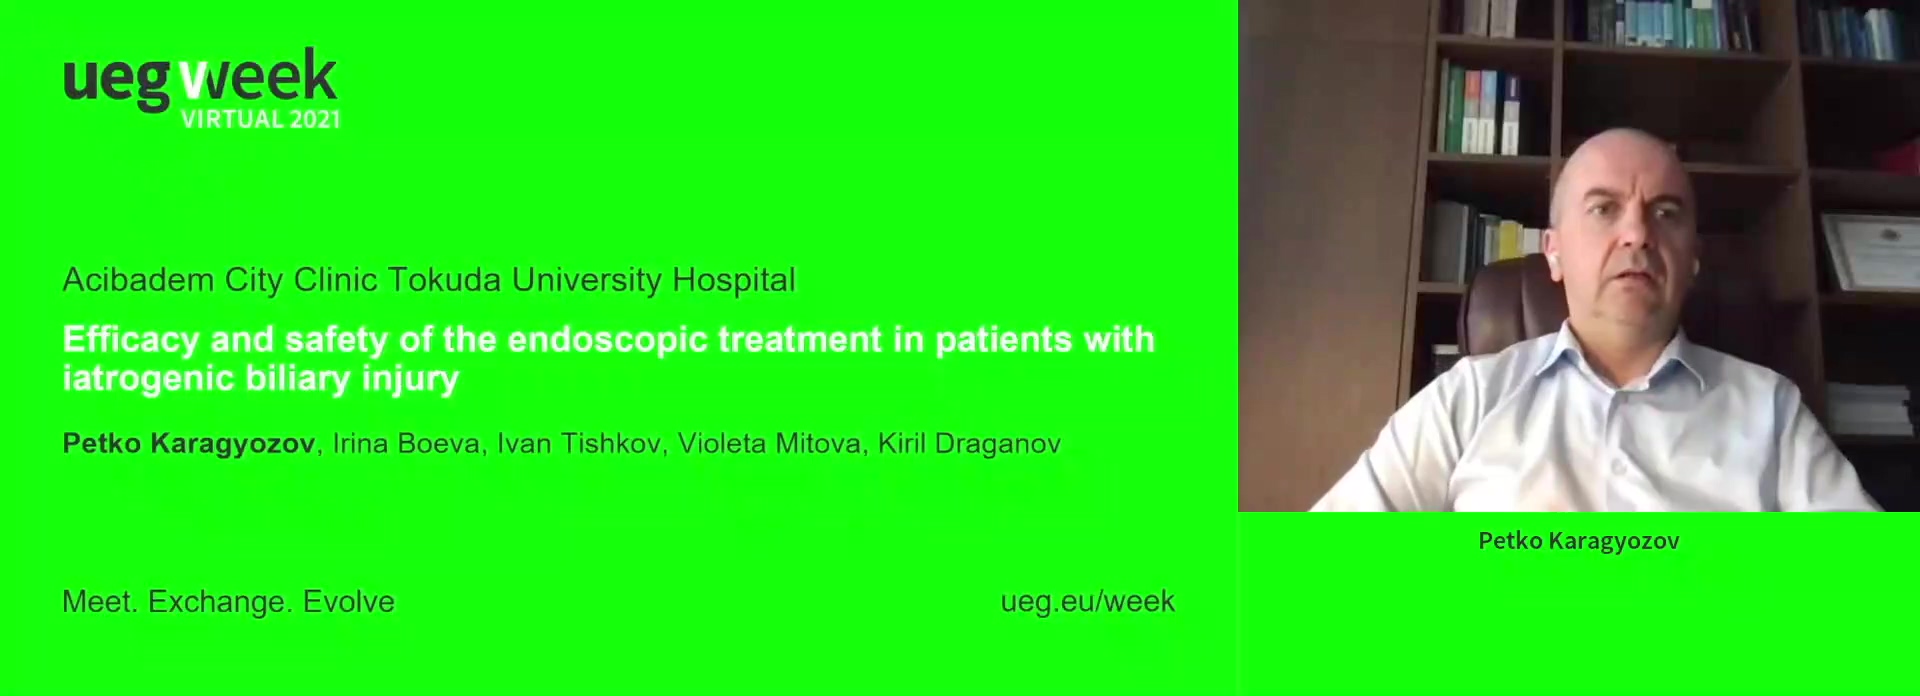 EFFICACY AND SAFETY OF THE ENDOSCOPIC TREATMENT IN PATIENTS WITH IATROGENIC BILIARY INJURY